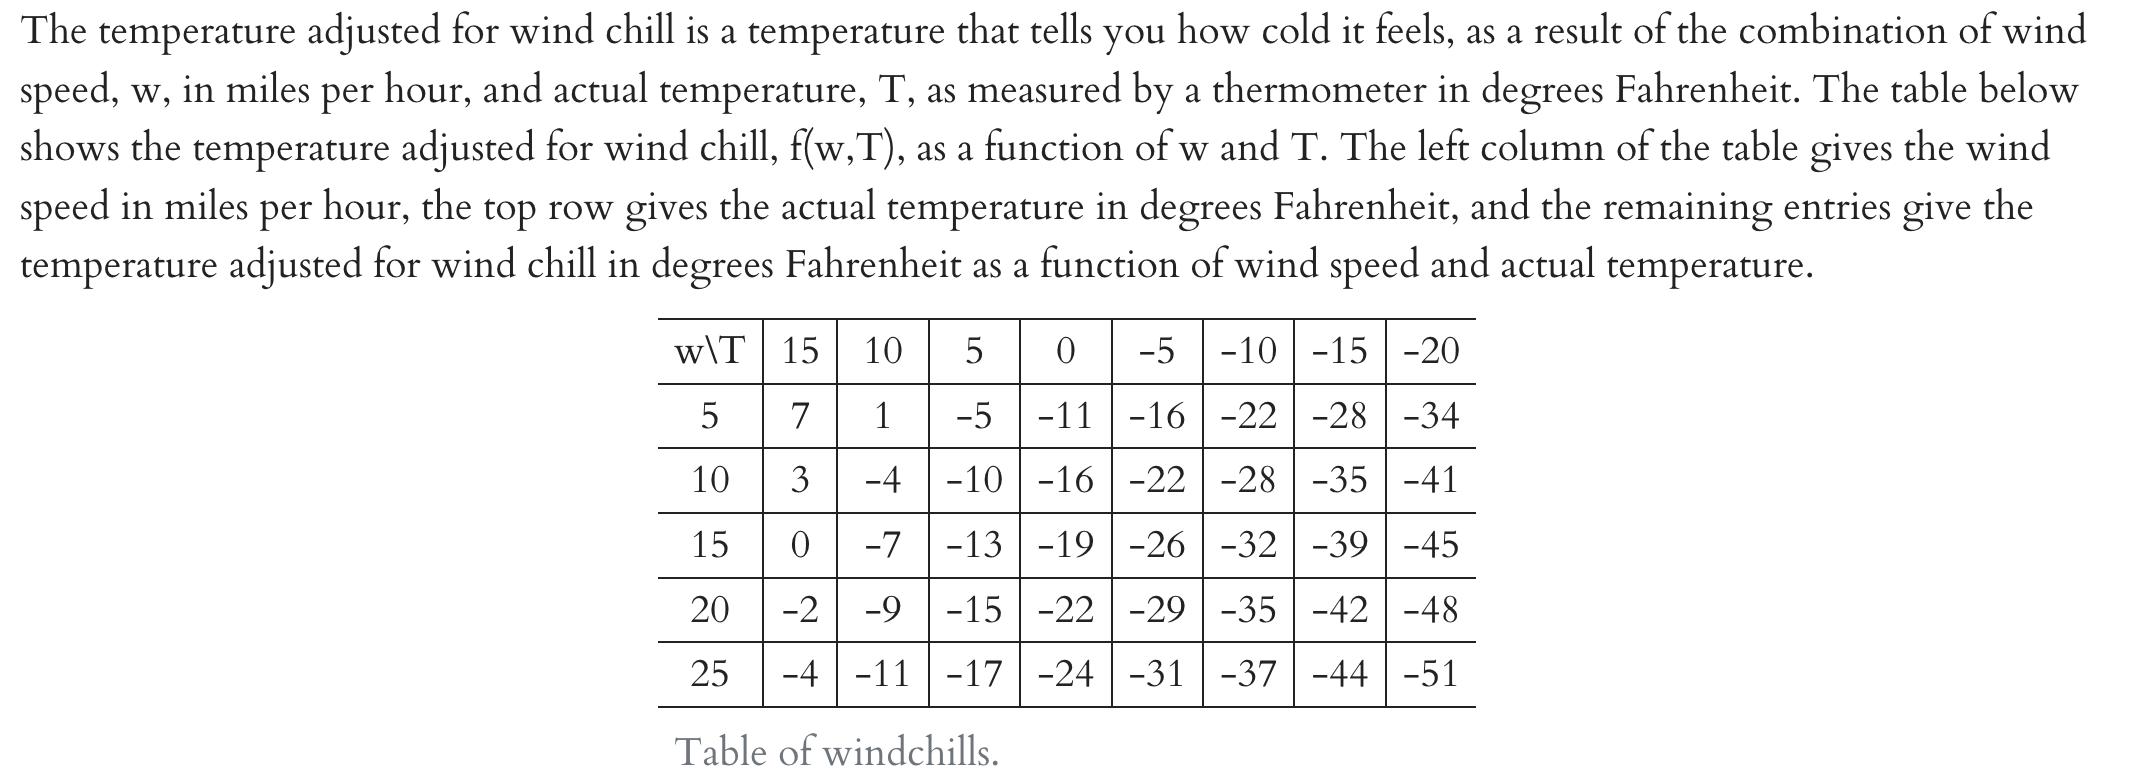 The temperature adjusted for wind chill is a temperature that tells you how cold it feels, as a result of the combination of